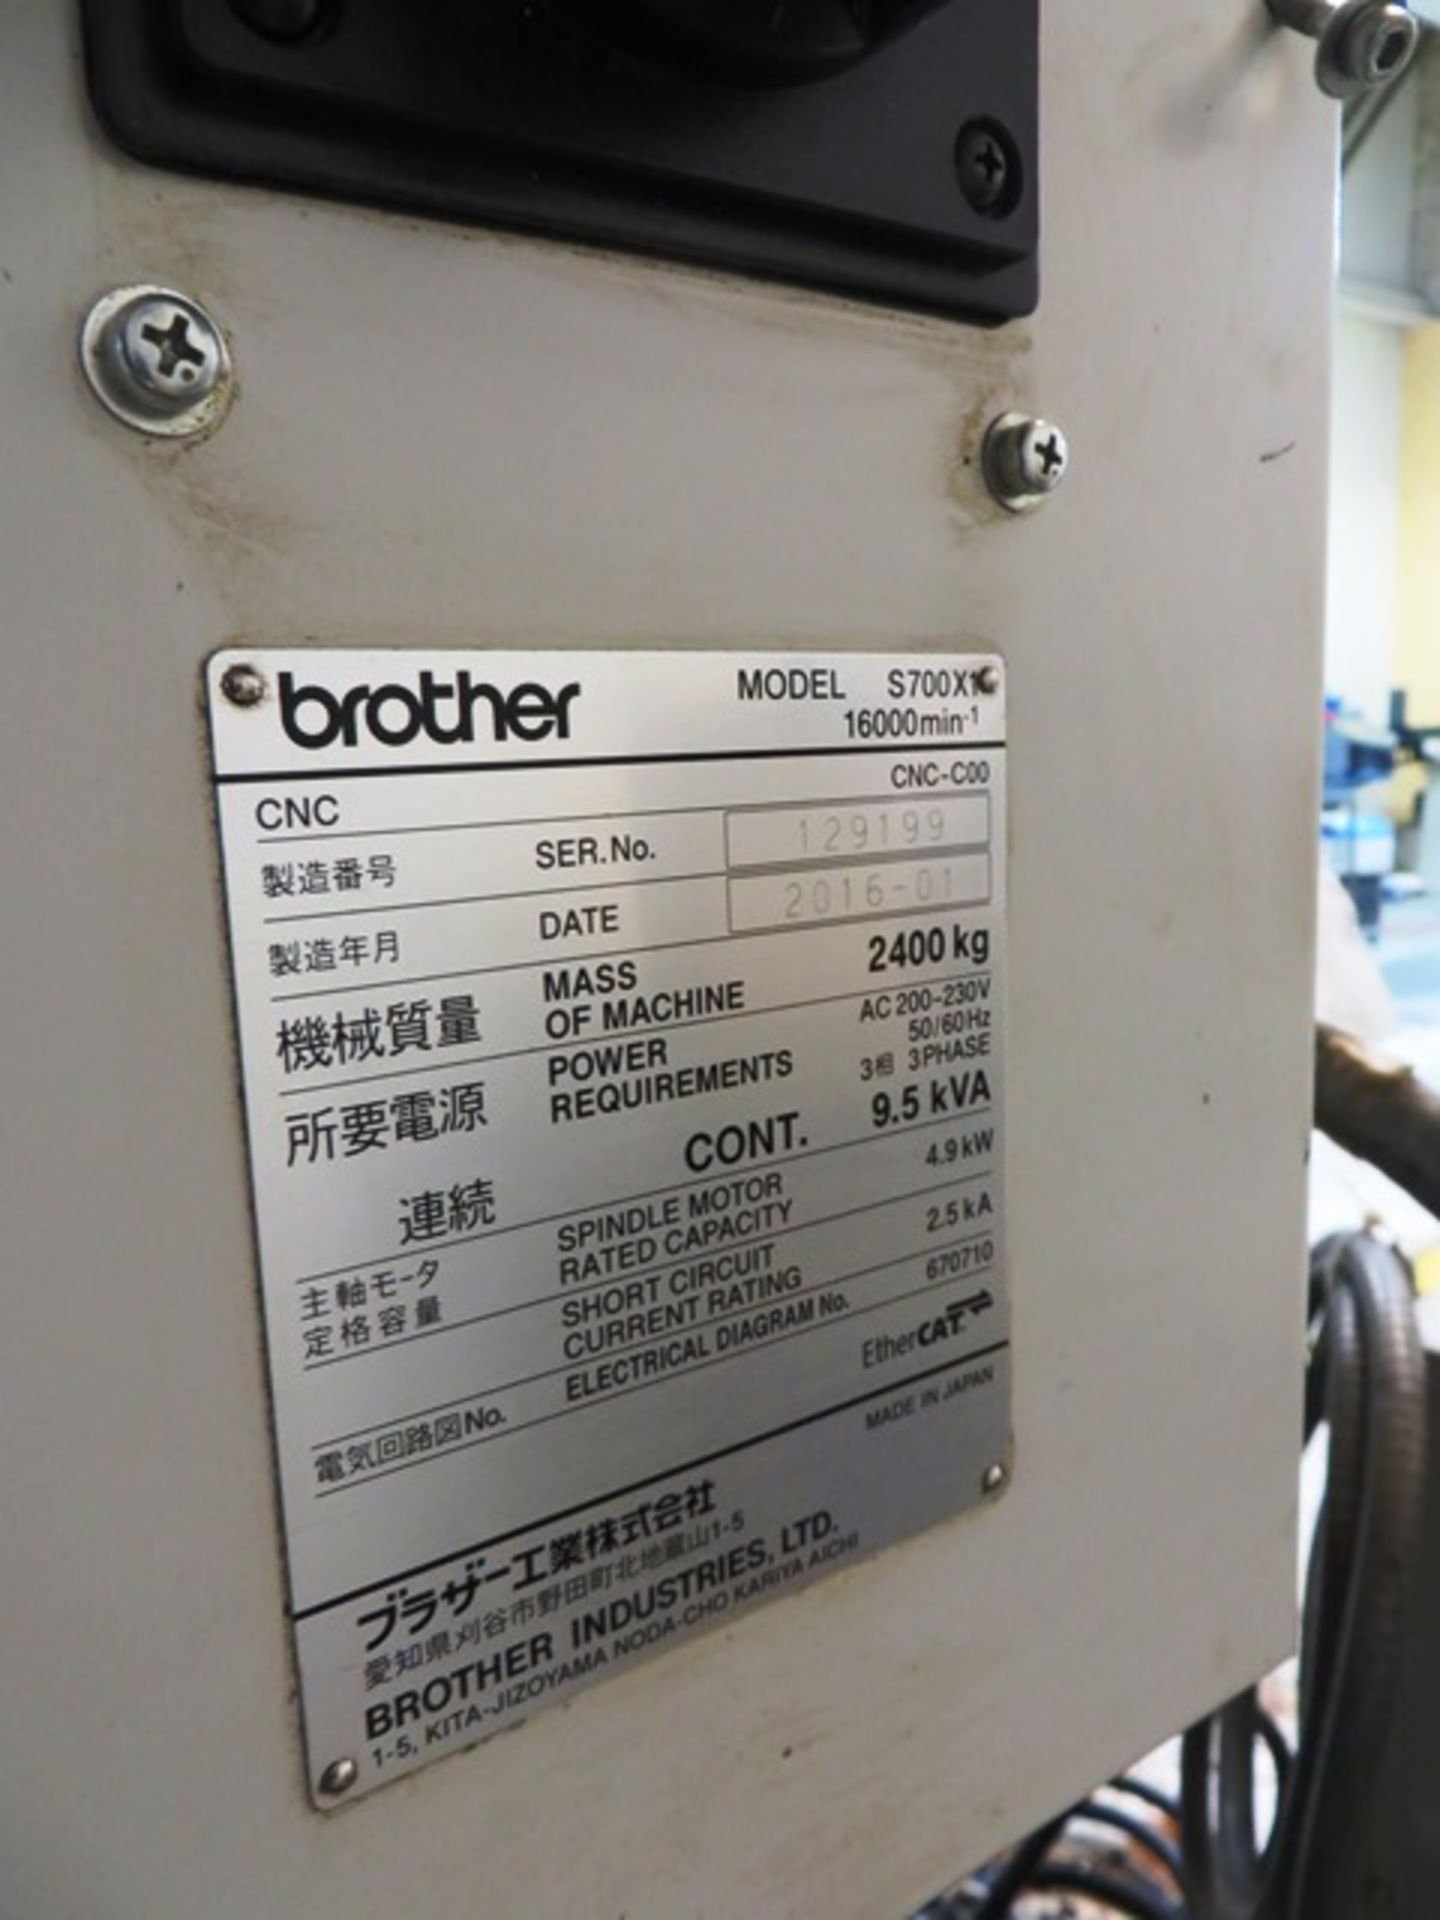 Brother Speedio S700X1 CNC Vertical Milling / Tapping Center - Image 8 of 8